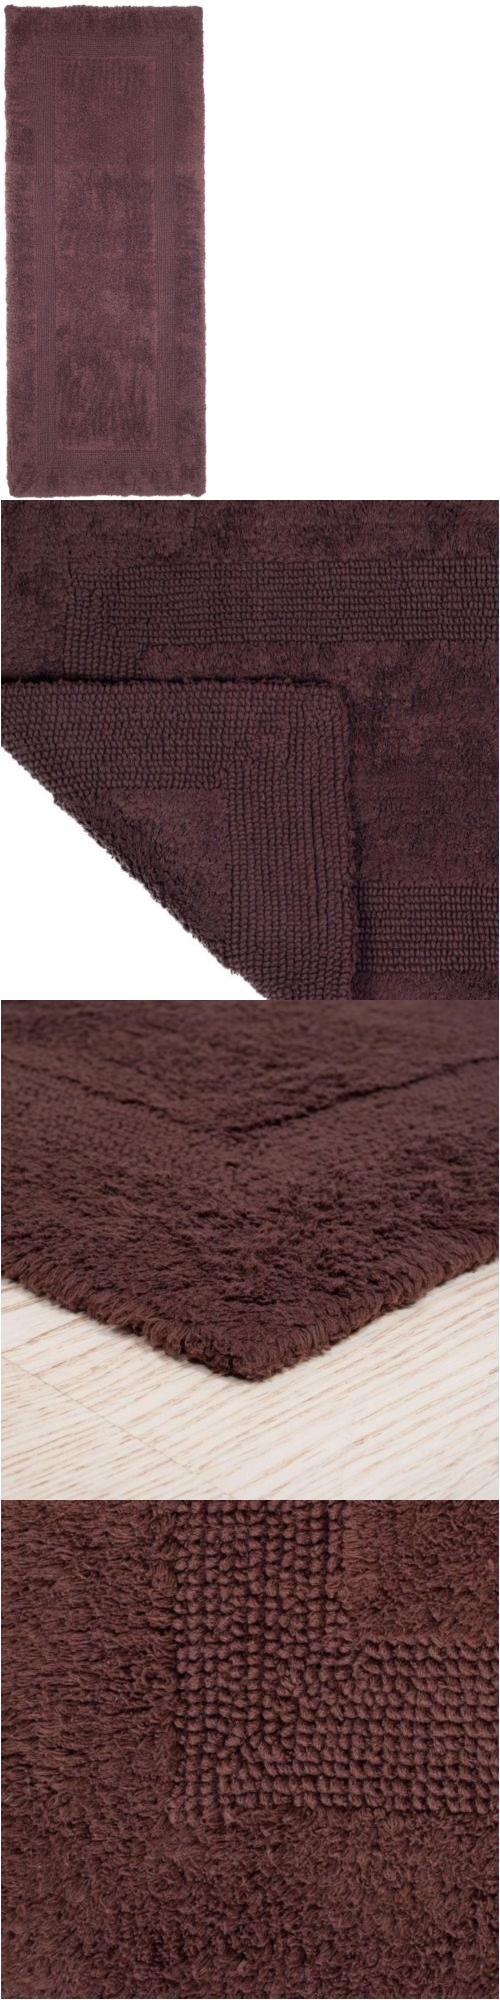 bathmats rugs and toilet covers 133696 2 x 5 ft brown reversible long bath